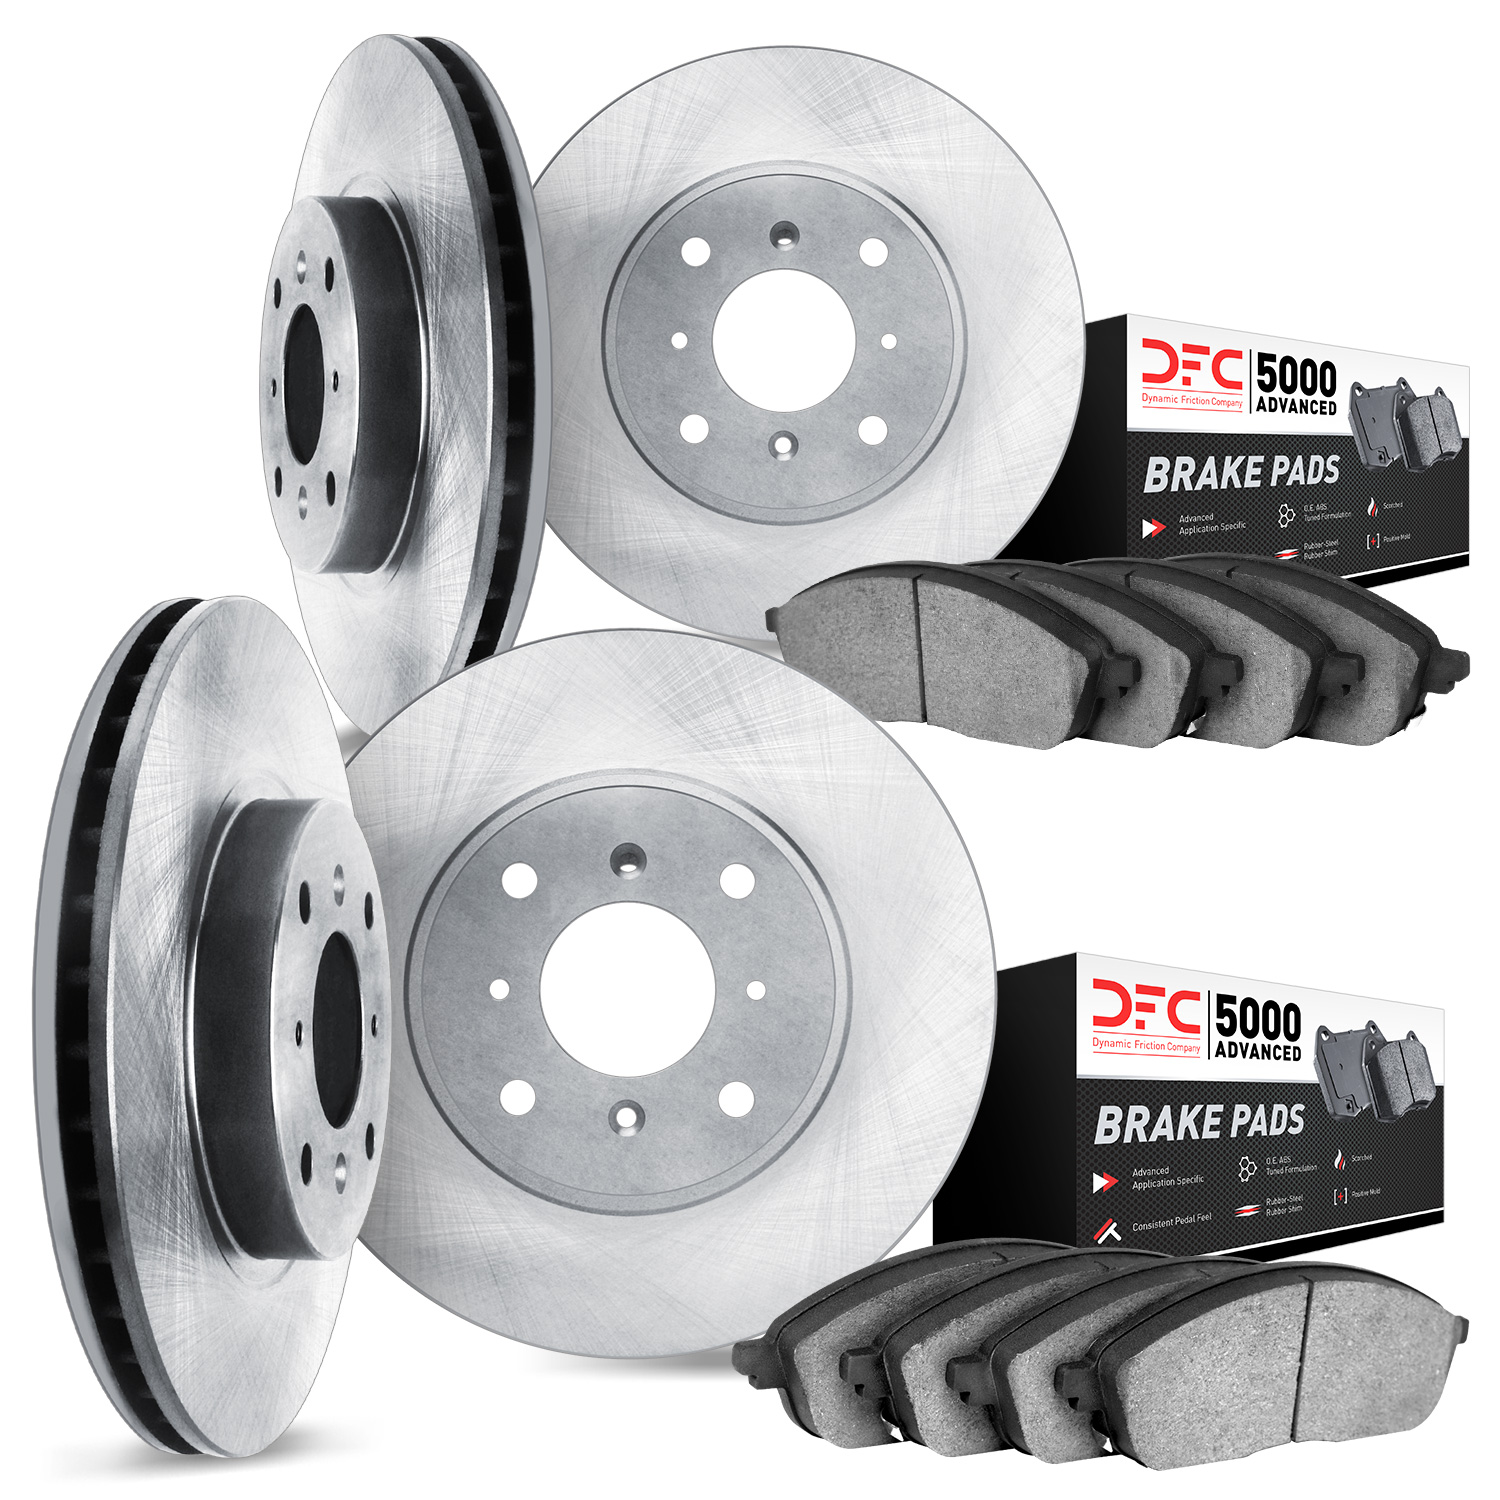 6504-56098 Brake Rotors w/5000 Advanced Brake Pads Kit, 1995-2002 Ford/Lincoln/Mercury/Mazda, Position: Front and Rear